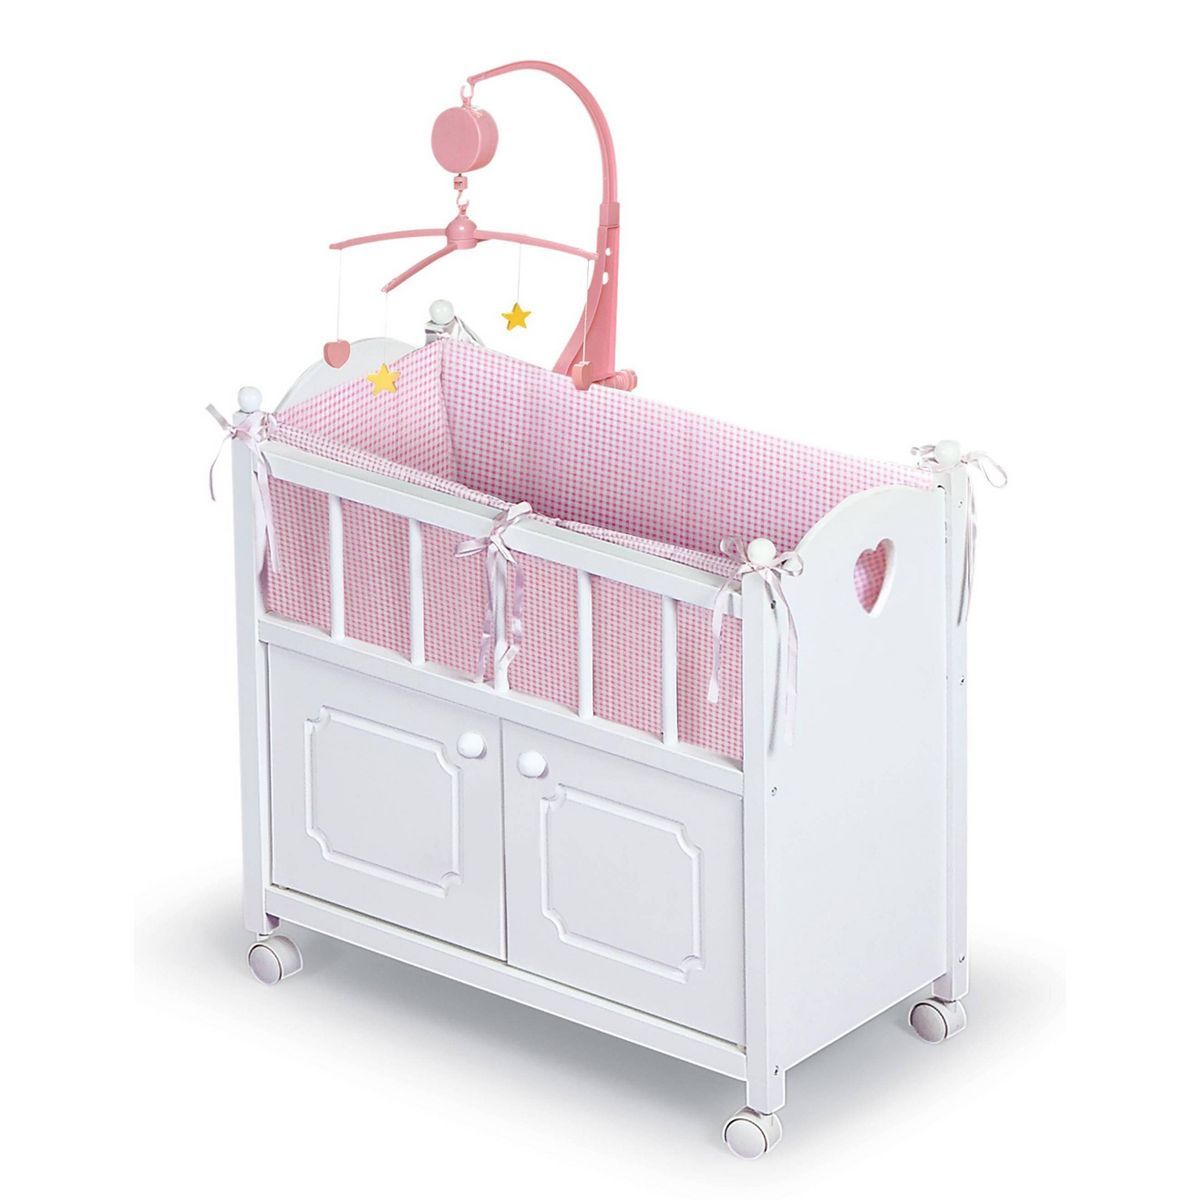 Badger Basket Cabinet Doll Crib with Gingham Bedding and Free Personalization Kit - White/Pink | Target